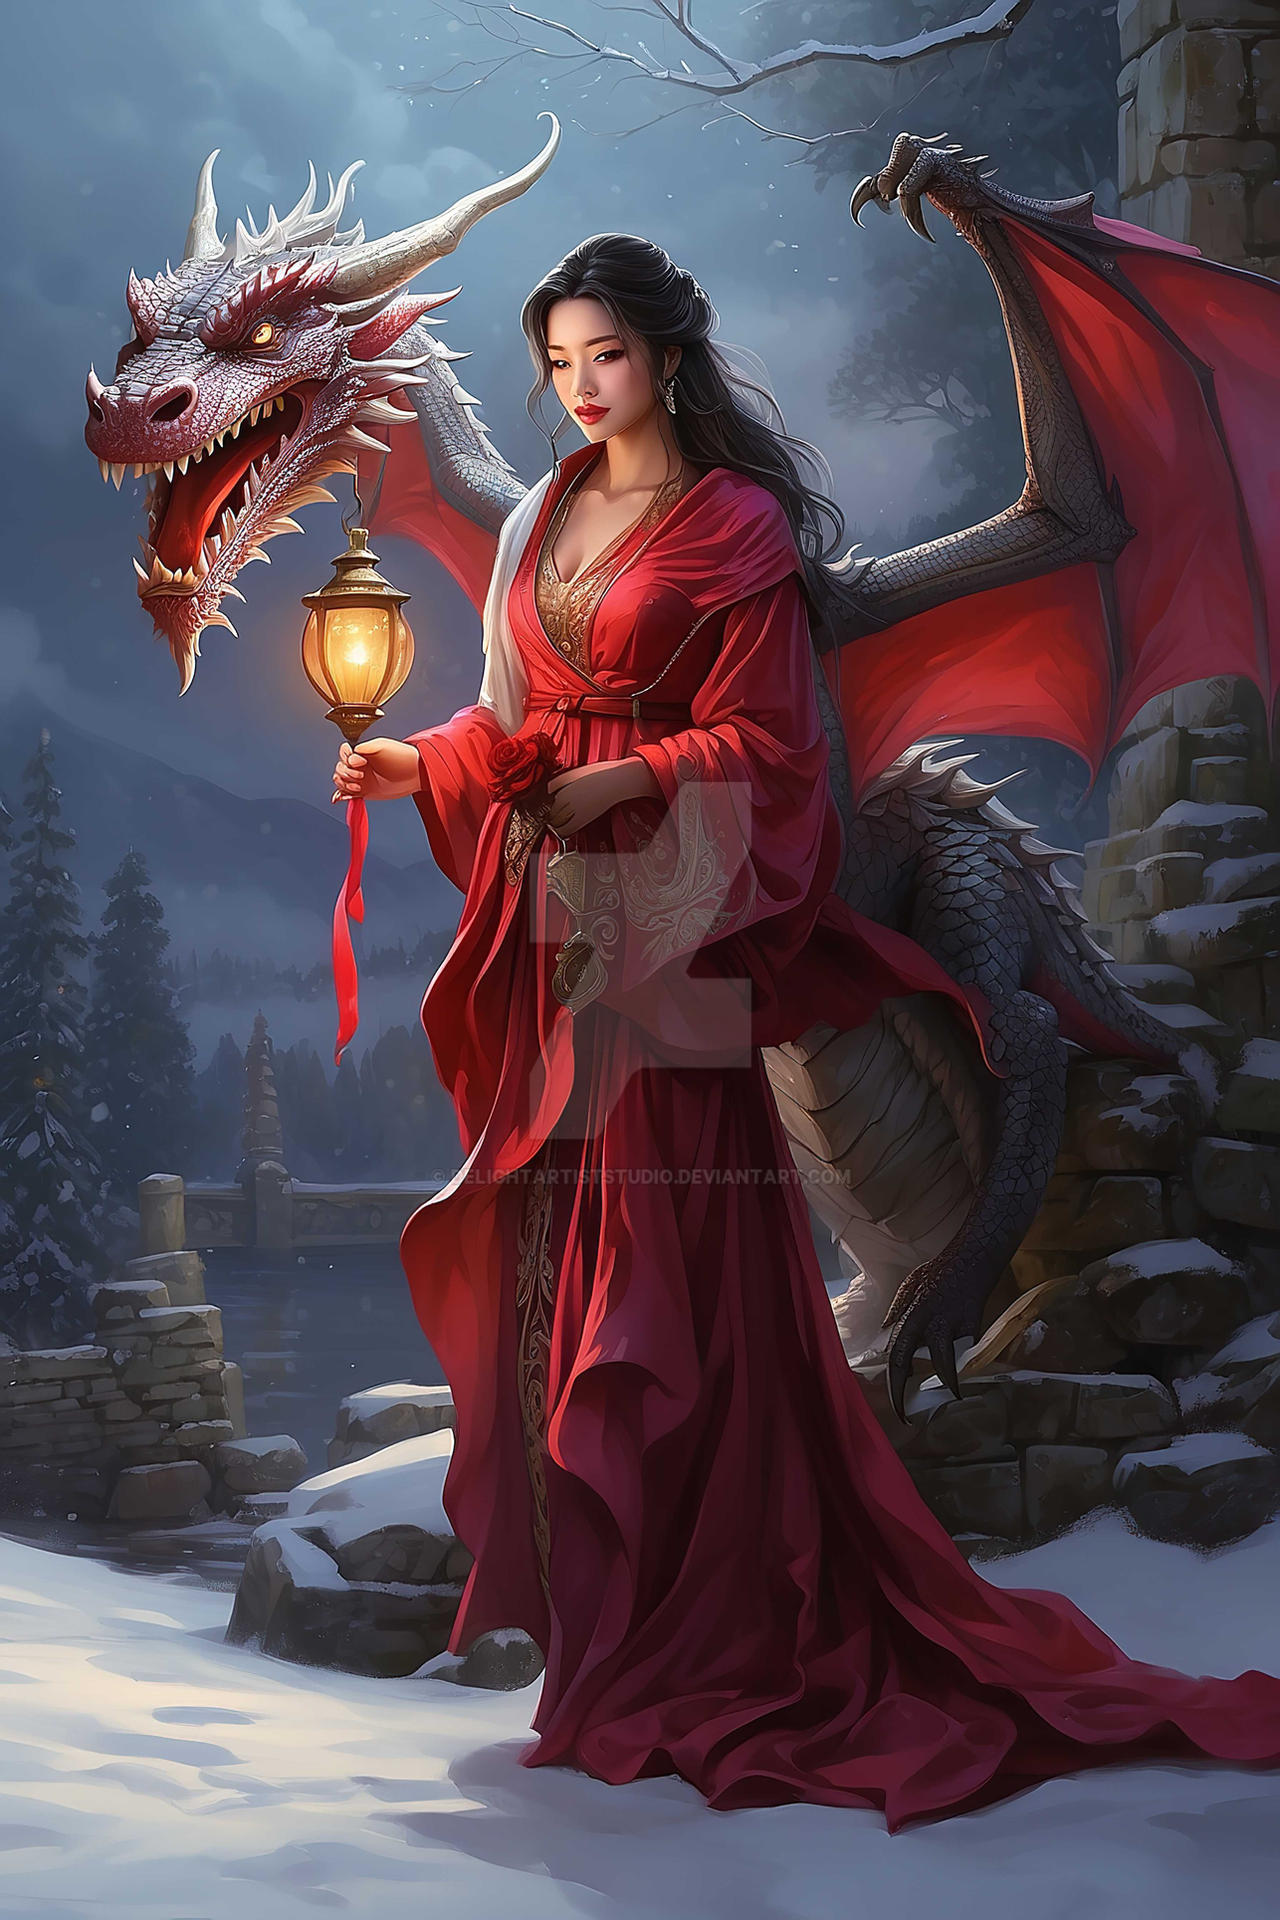 enchanting_dragon_lady__unleashing_mythical_beauty_by_delightartiststudio_dgnrbcz-fullview.jpg